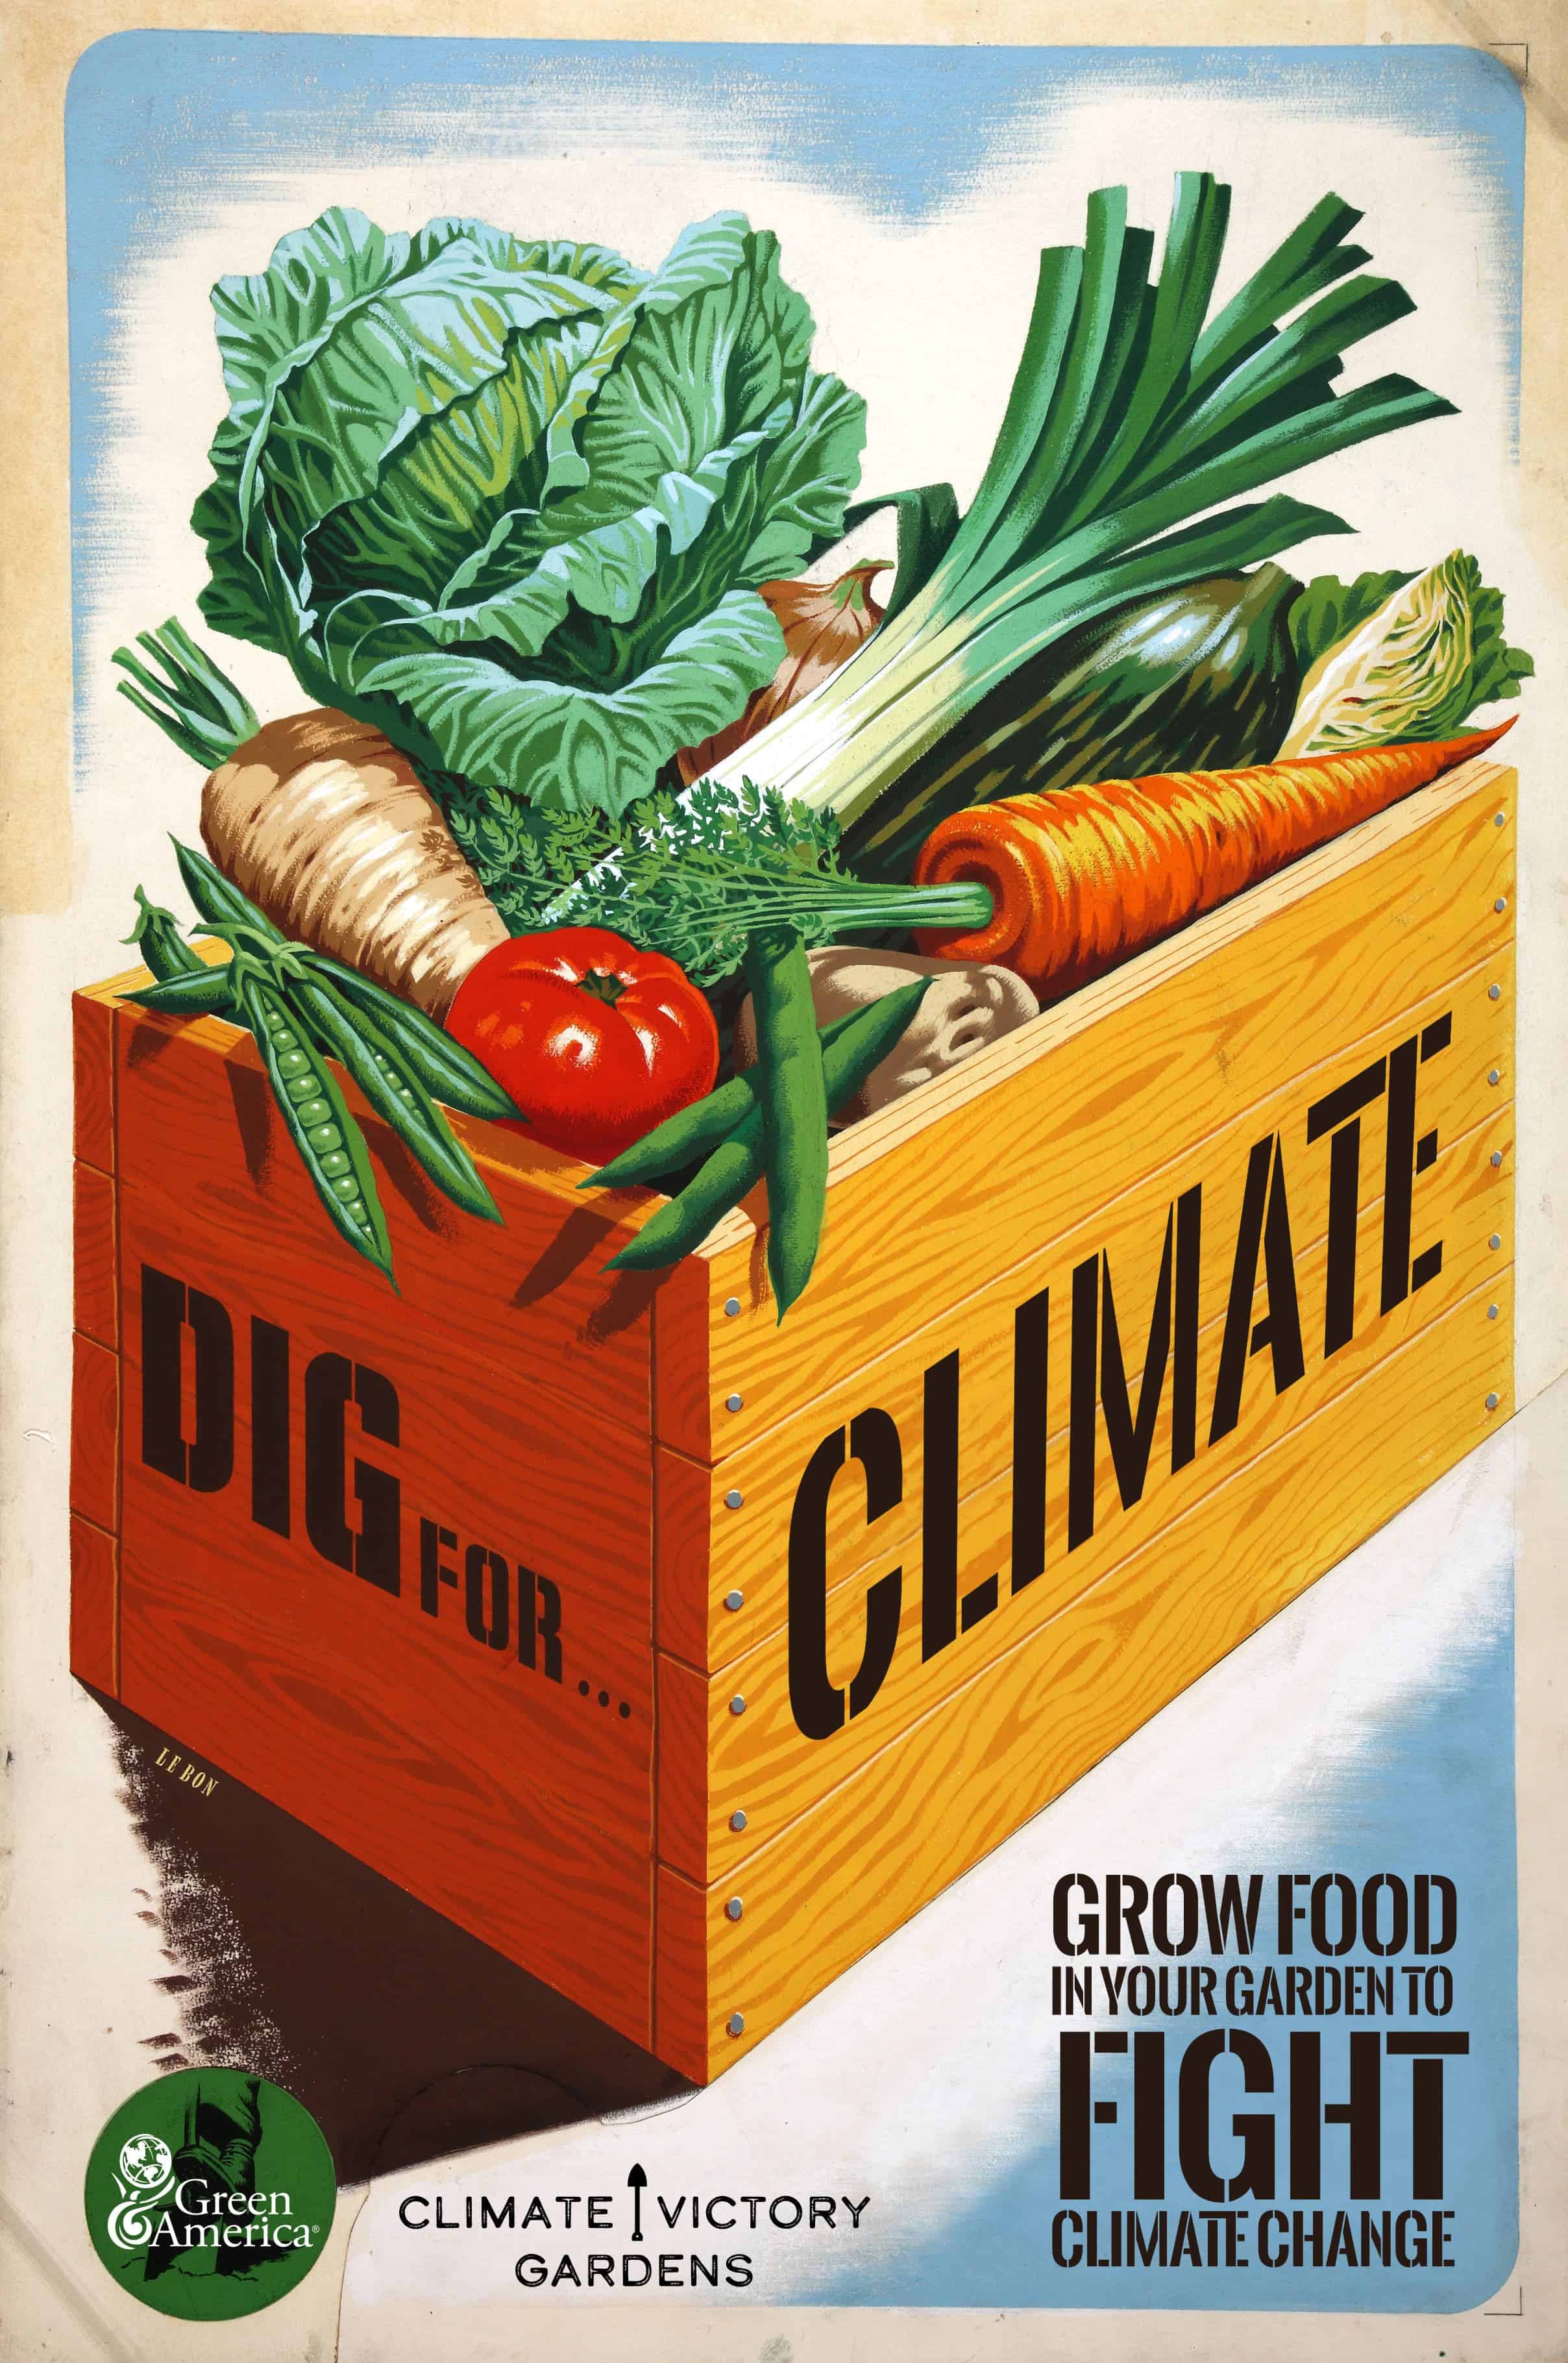 Dig for Climate.